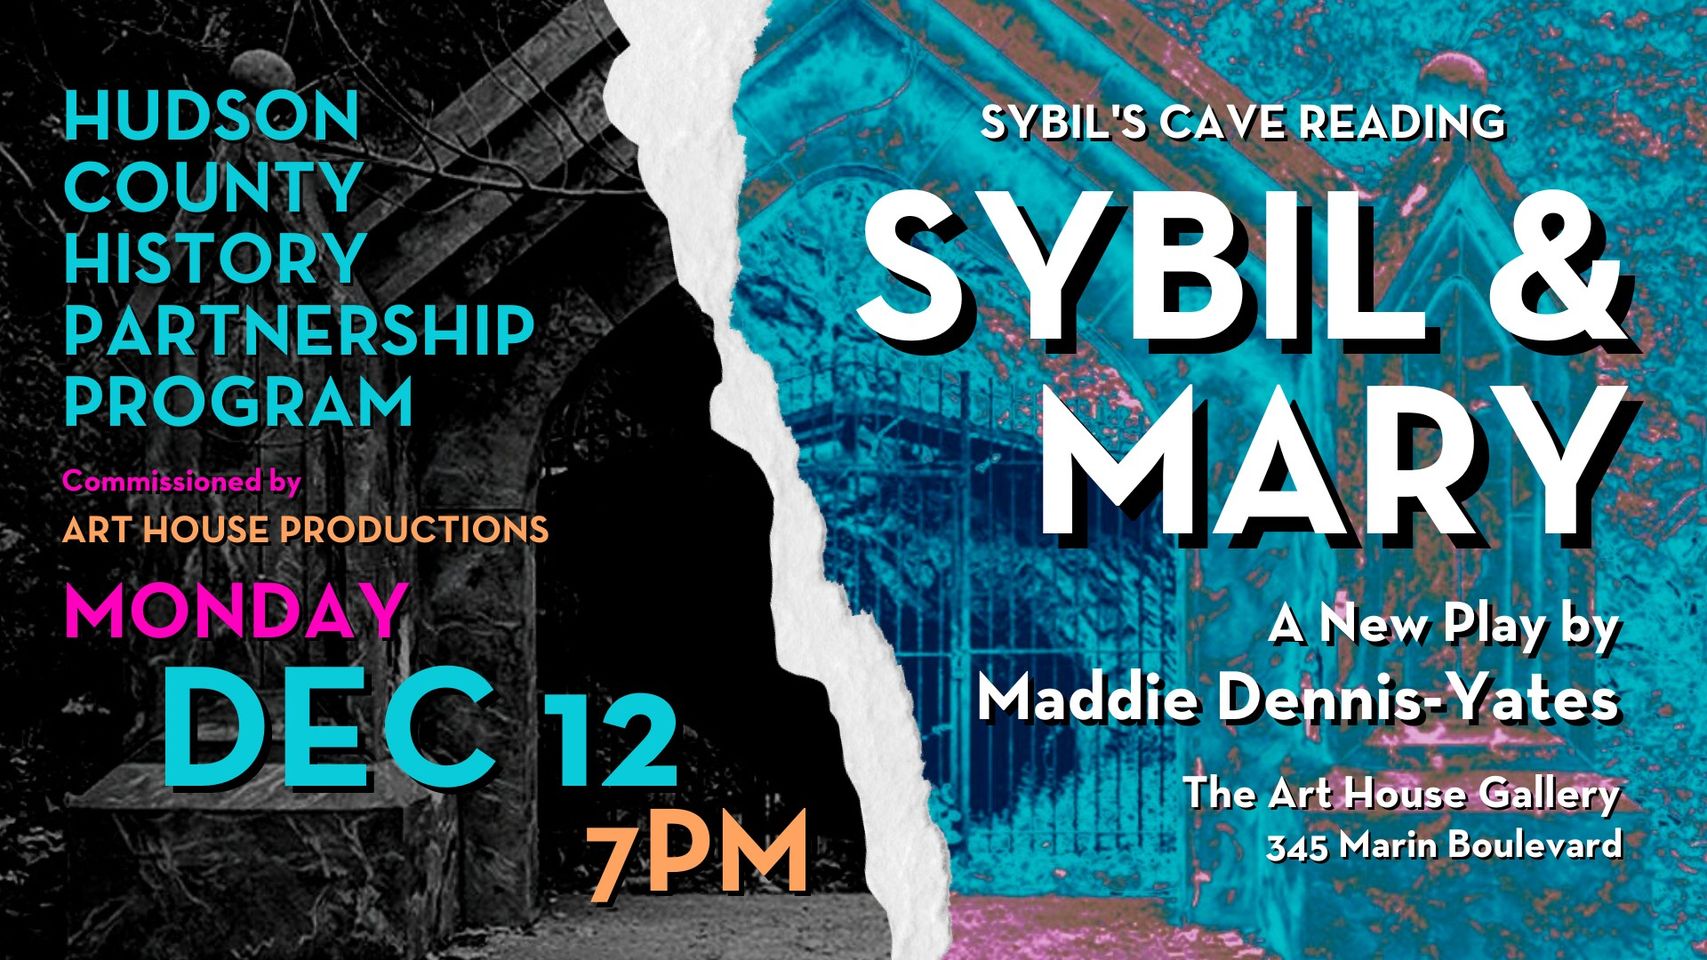 Sybil's Cave Reading, Sybil & Mary, A New Play by Maddie Dennis Yates, The Art House Gallery 345 Marin Boulevard, Hudson County History Partnership Program commissioned by Art House Productions Monday Dec. 12 7PM